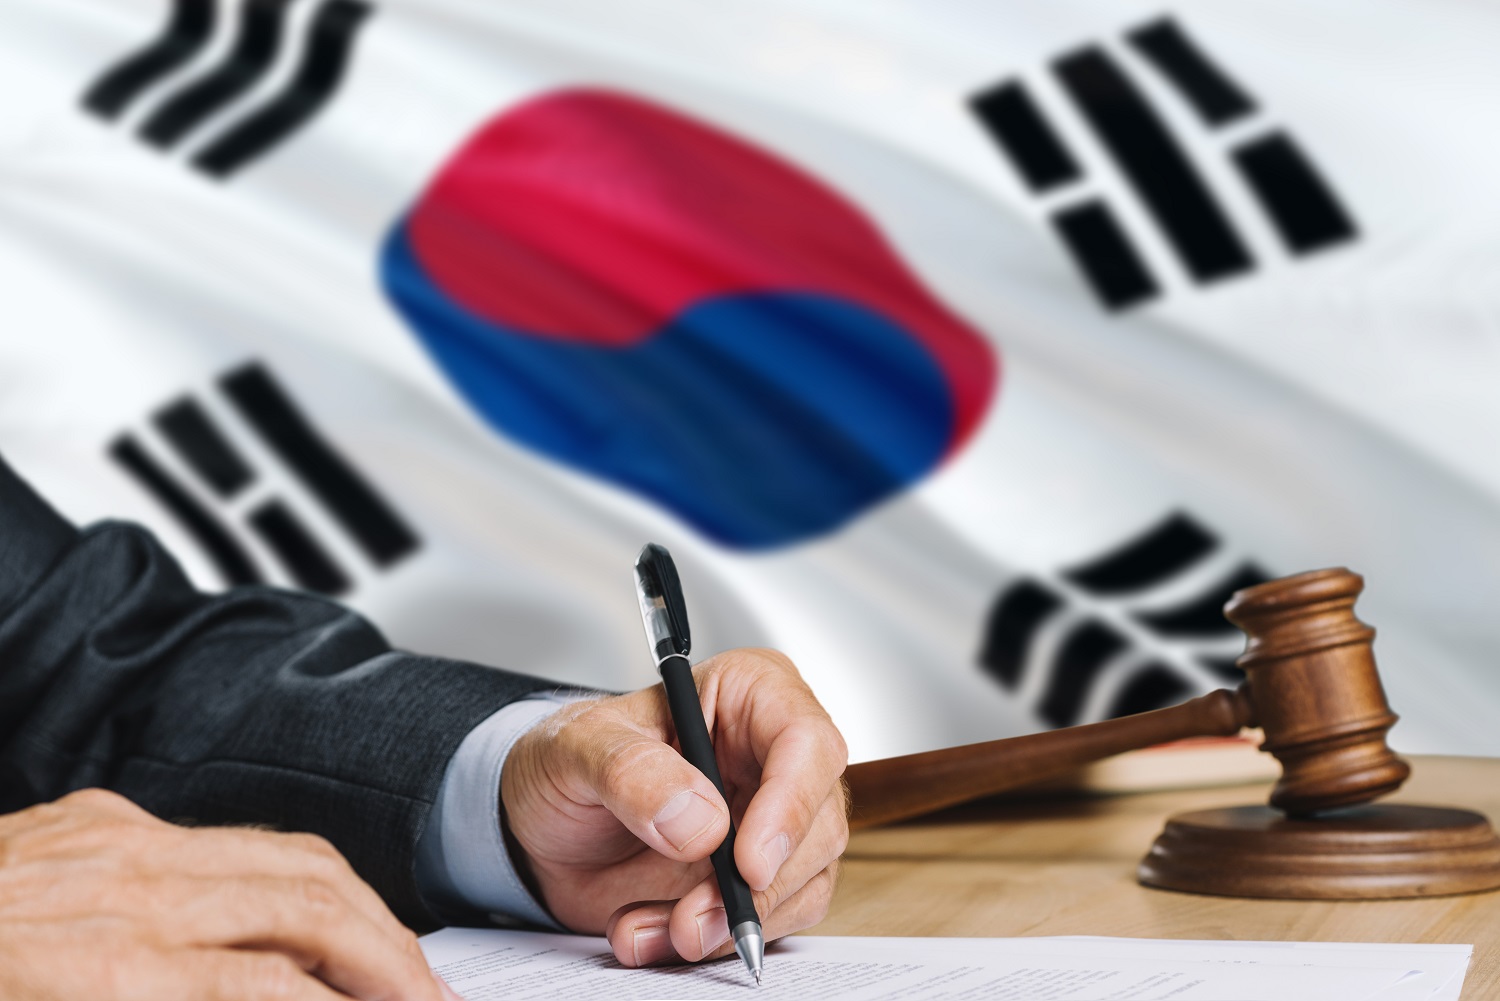 A person in a suit writes on a document with the South Korean flag and a wooden gavel and block in the background.